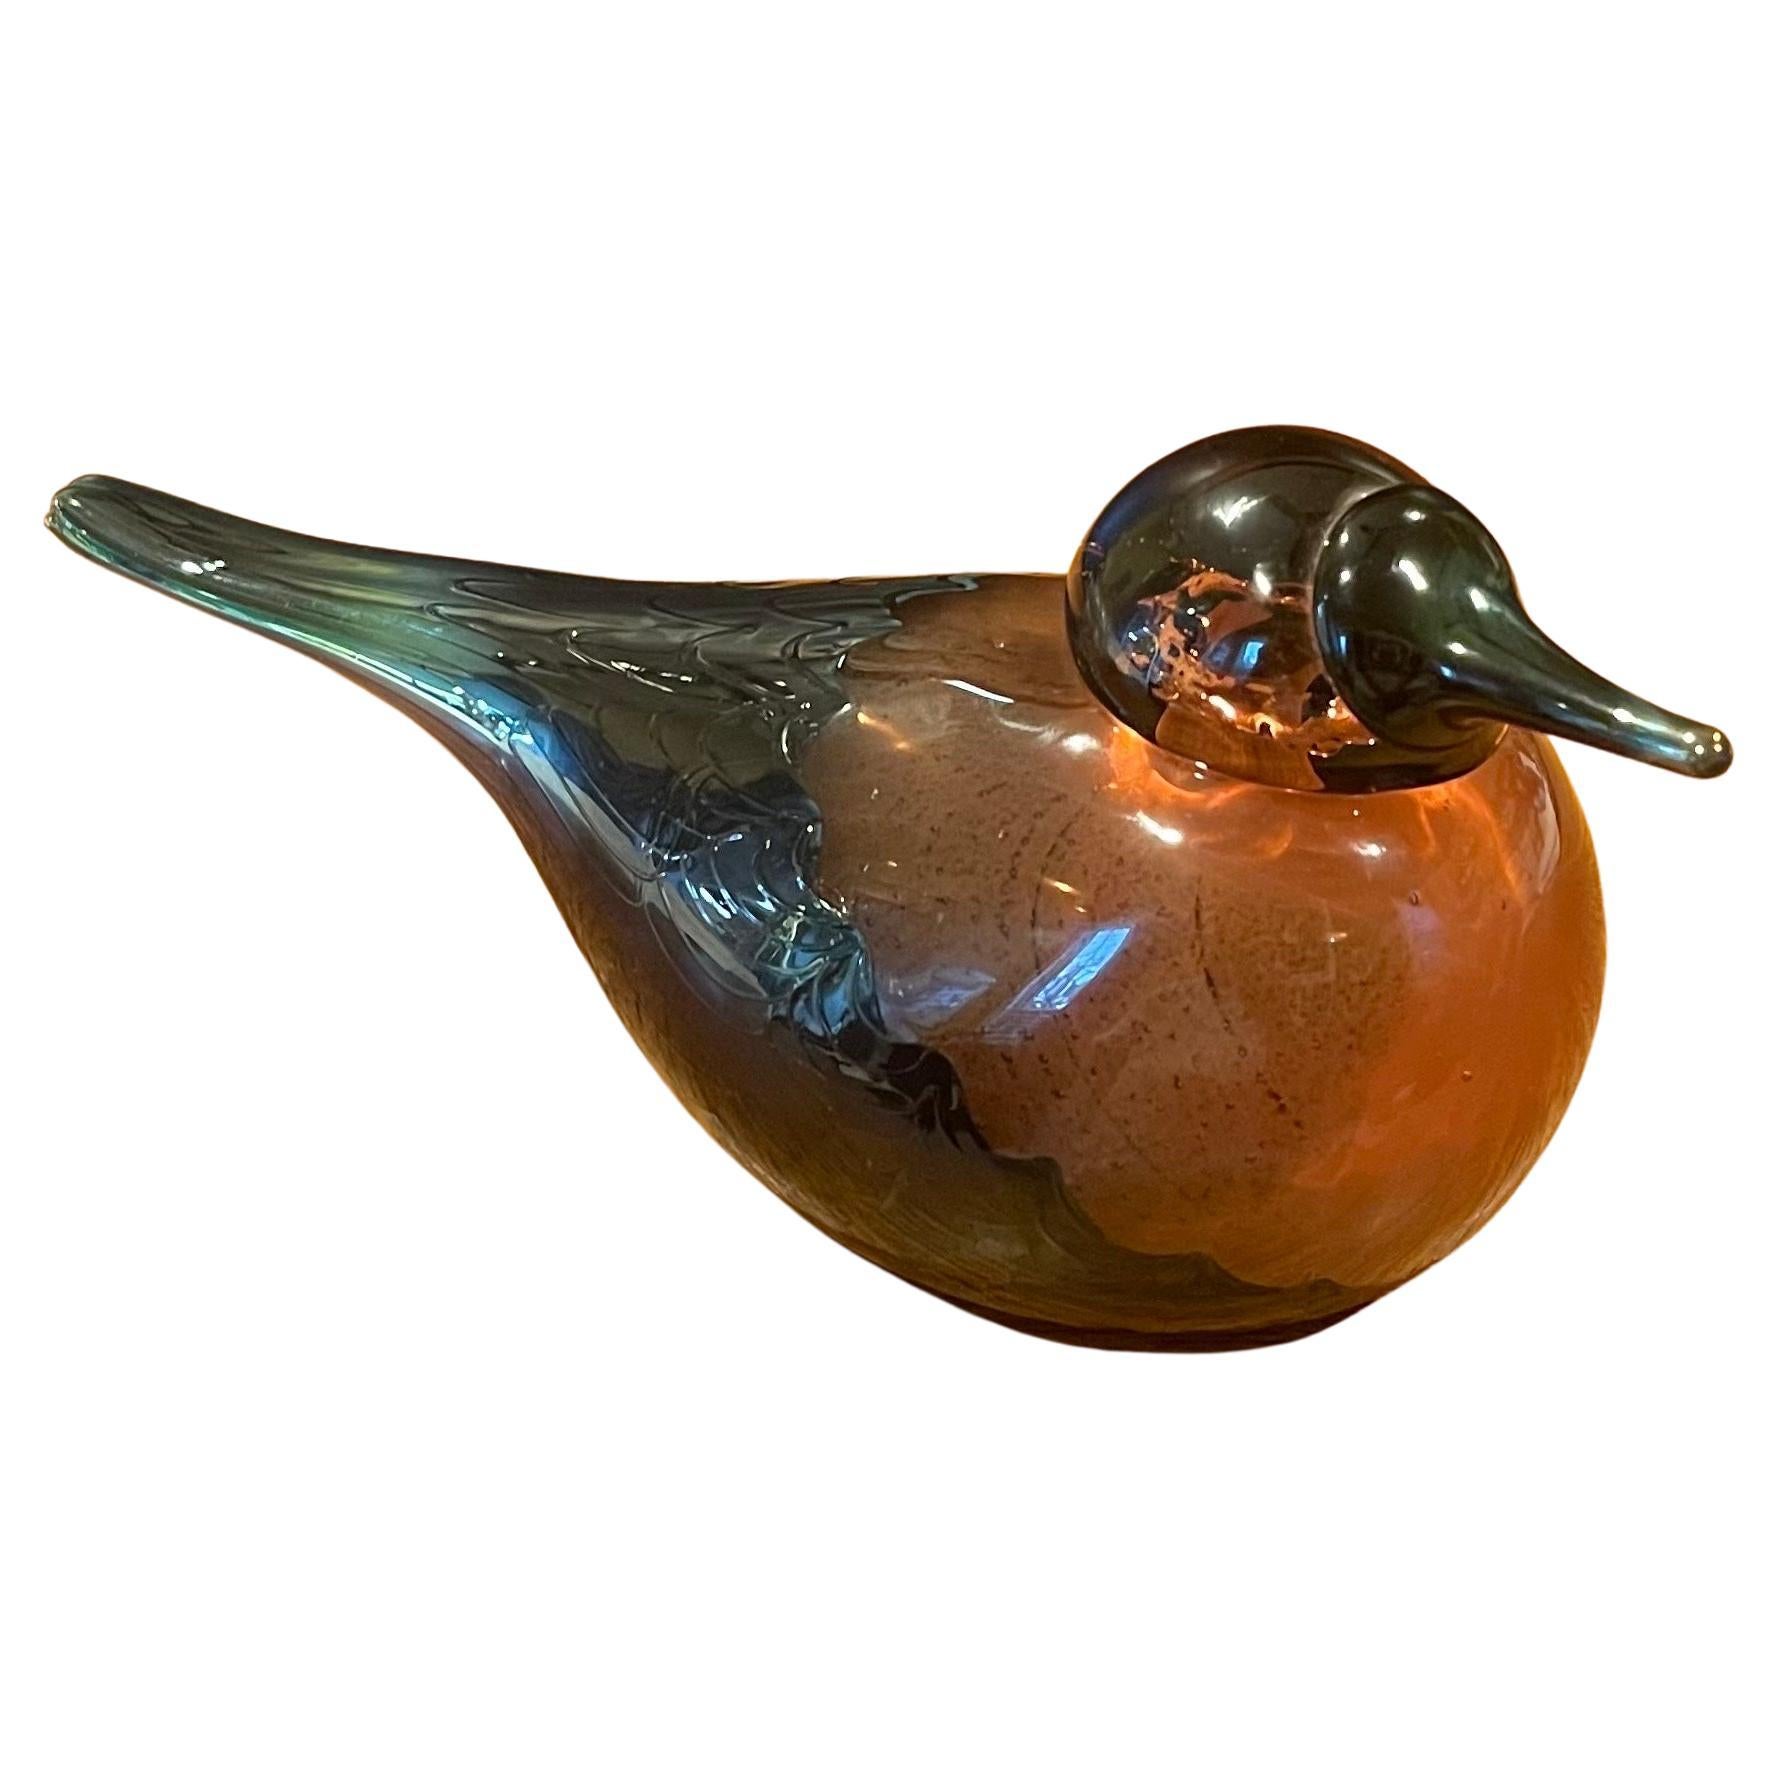 Limited Edition Art Glass Bird Sculpture by Oiva Toikka for Iittala of Finland For Sale